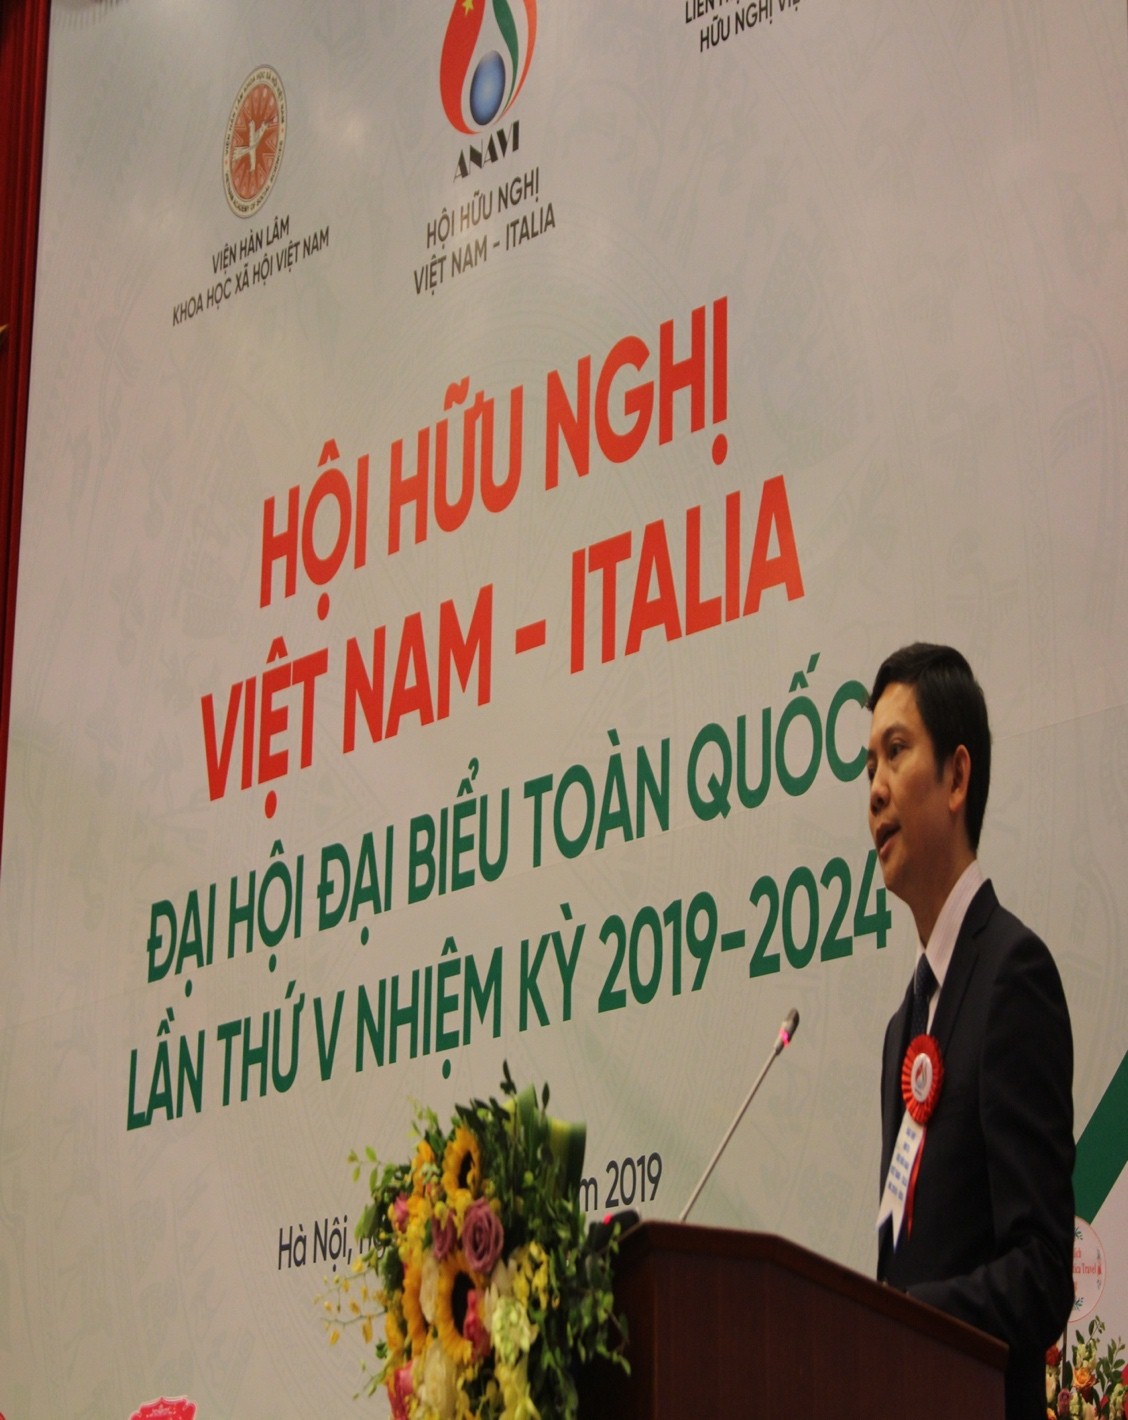 Assoc.Prof.Dr. Bui Nhat Quang, the new president of the Vietnam-Italy Friendship Association spoke at the Congress